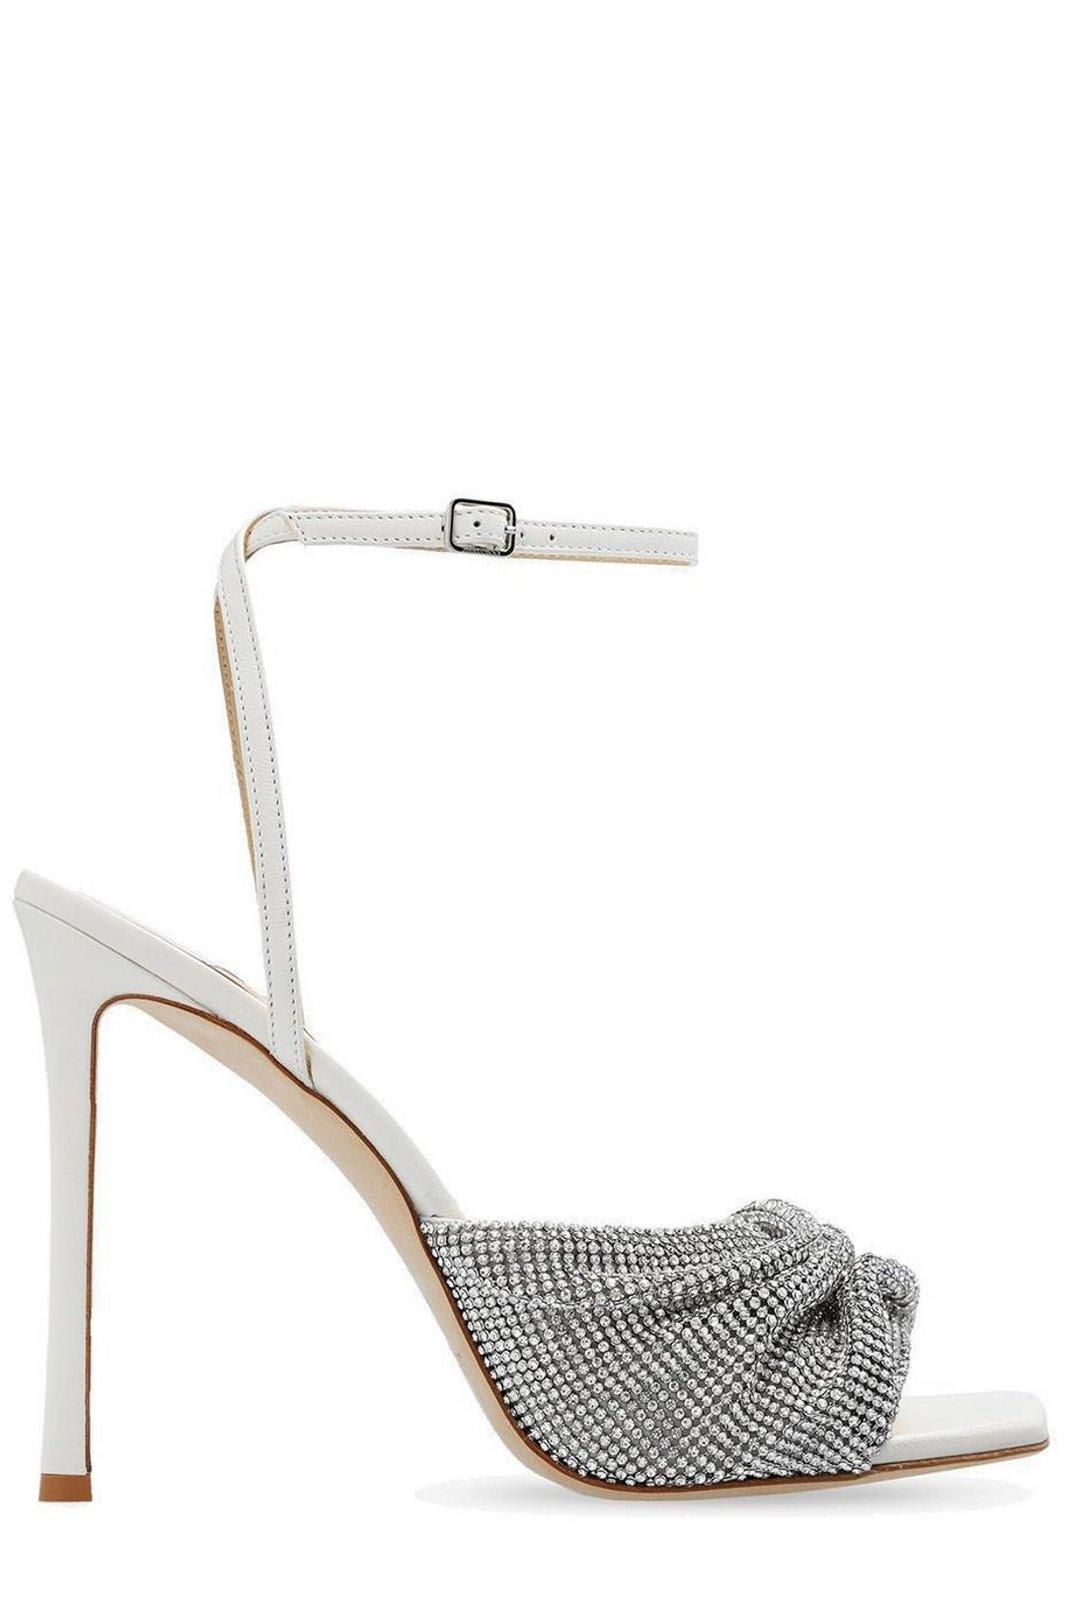 JIMMY CHOO NARIA KNOTTED HEELED SANDALS